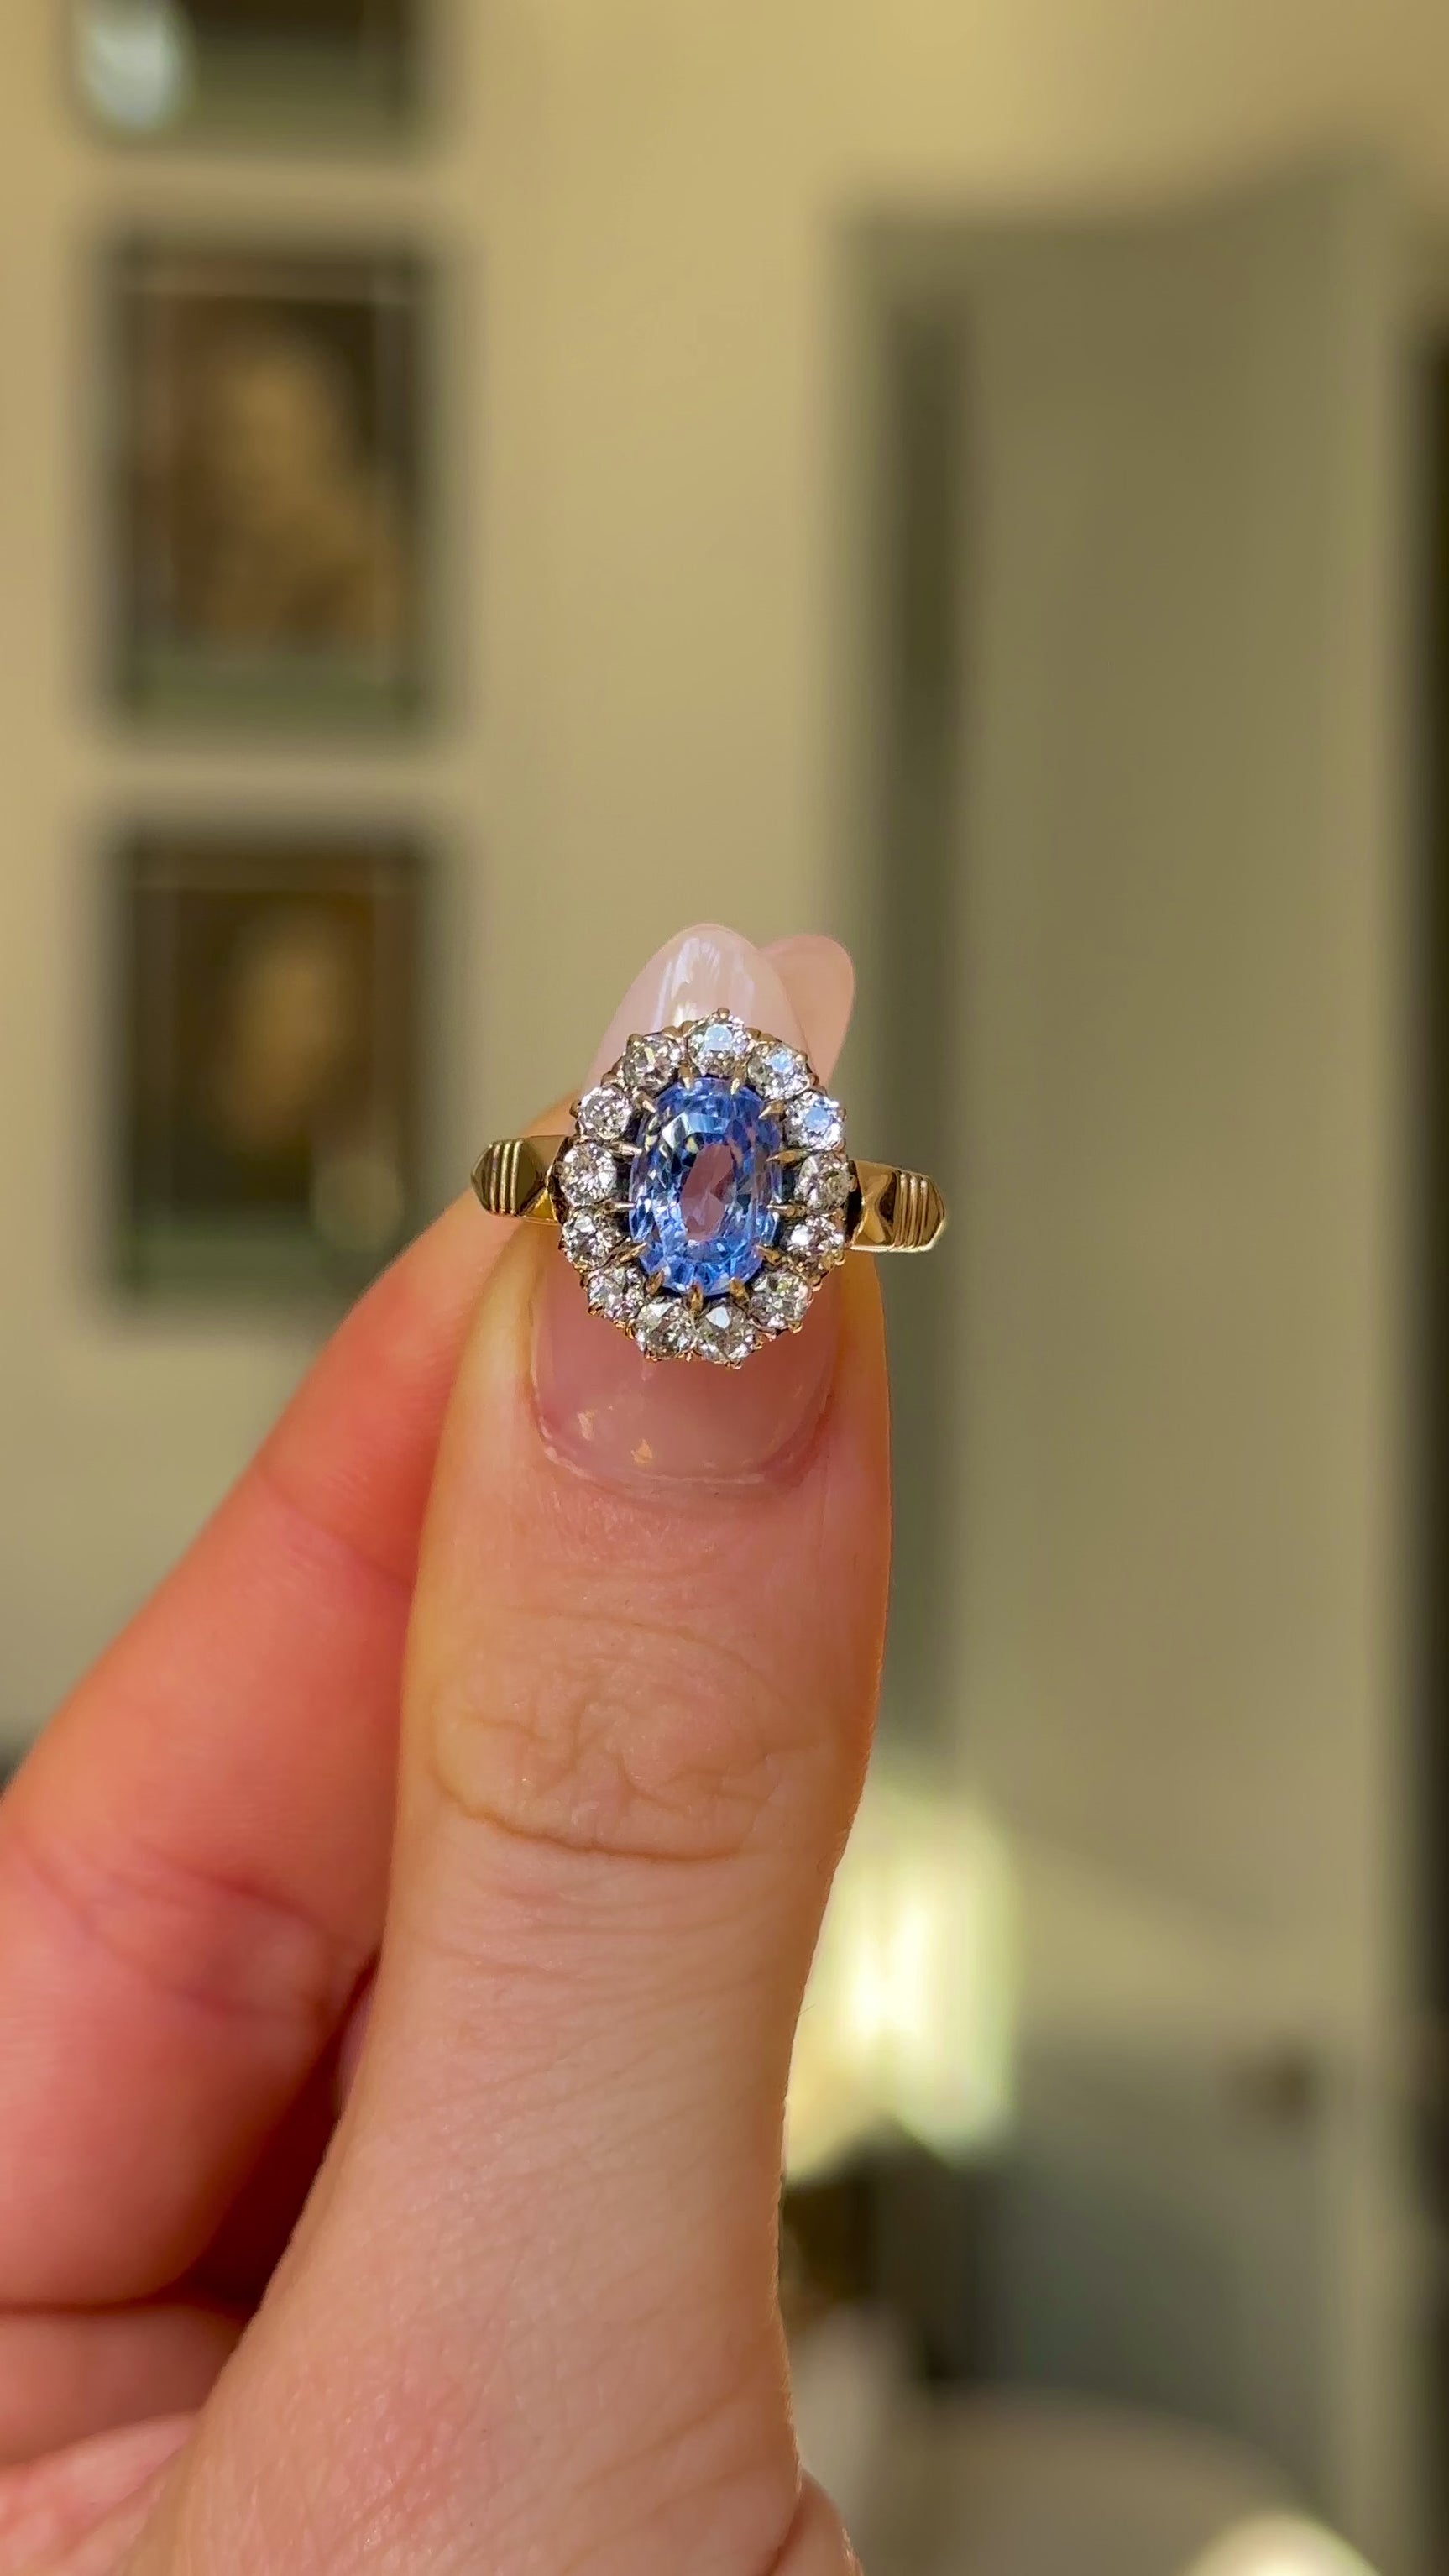 Antique, Edwardian Sapphire and Diamond Cluster Ring, 14ct Yellow Gold held in fingers and rotated to give perspective.